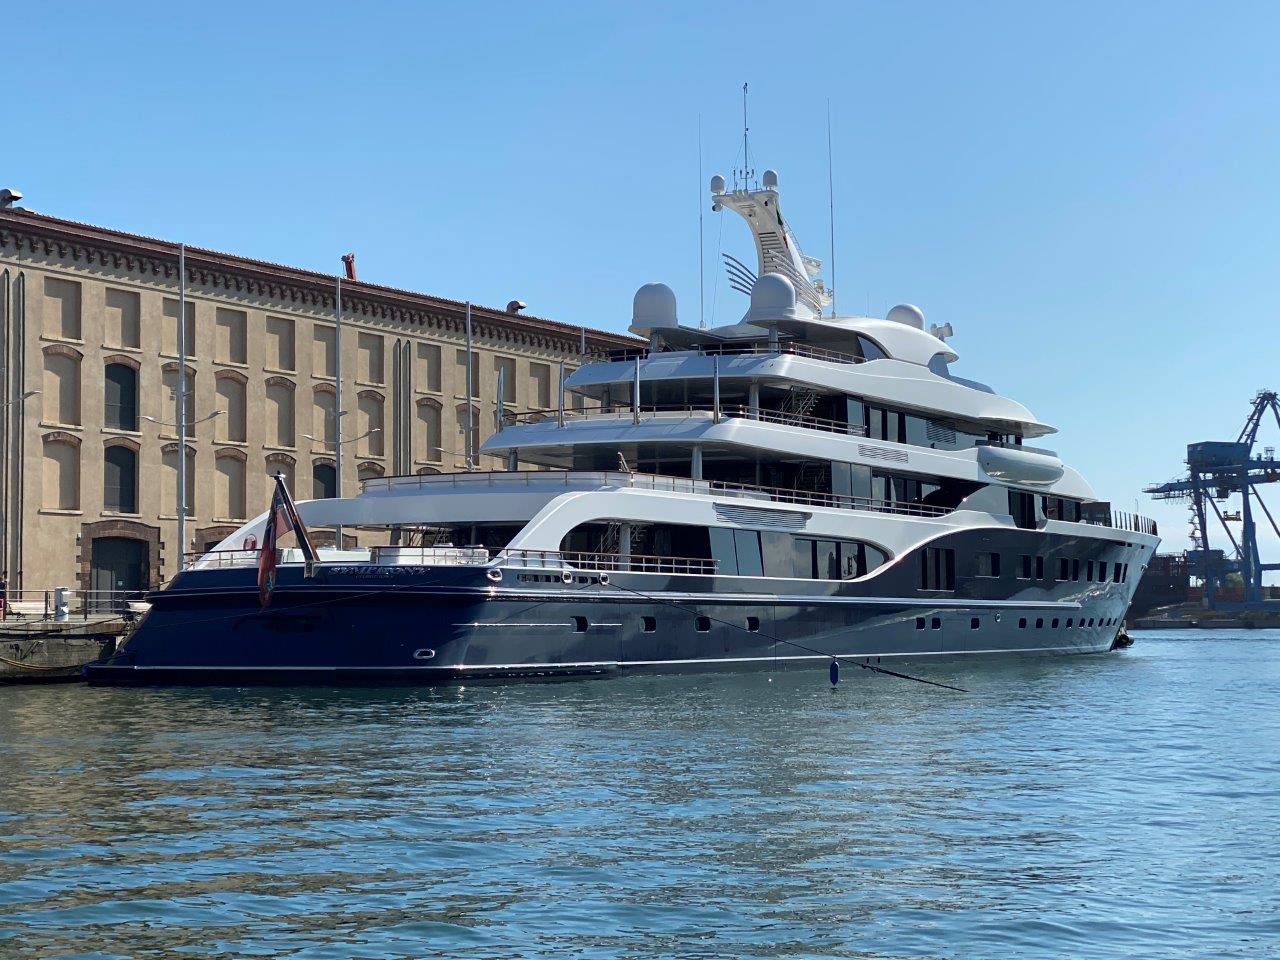 Bernard Arnault's Symphony Yacht is the Largest Feadship to be Ever Built